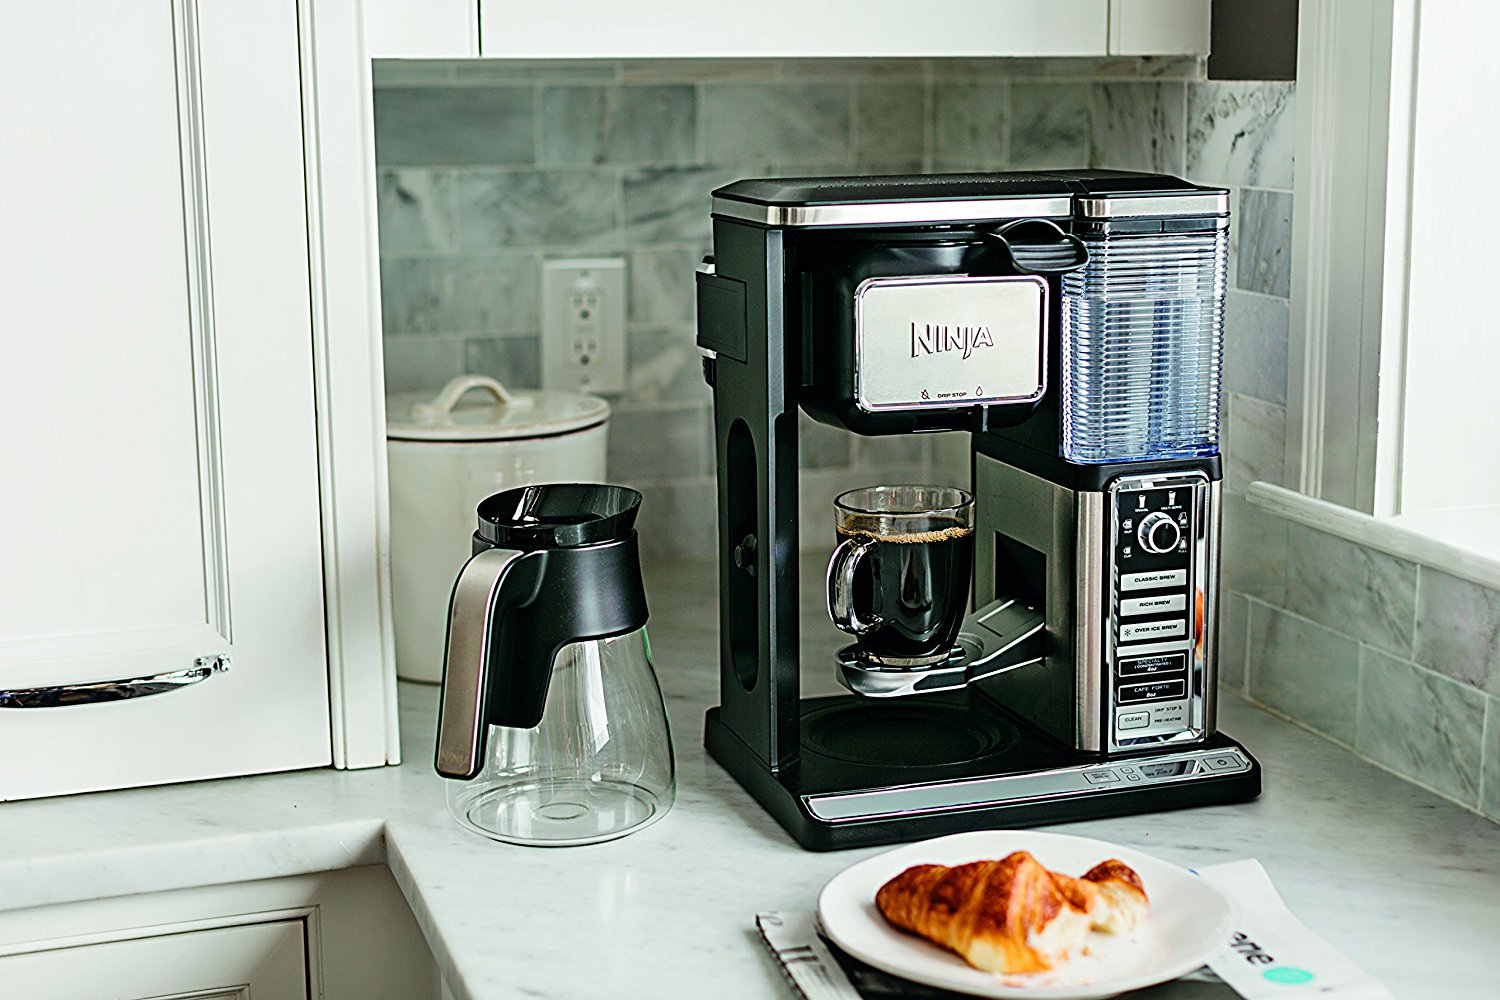 A Coffee Lovers Dream - A Review of the Ninja Coffee Bar System